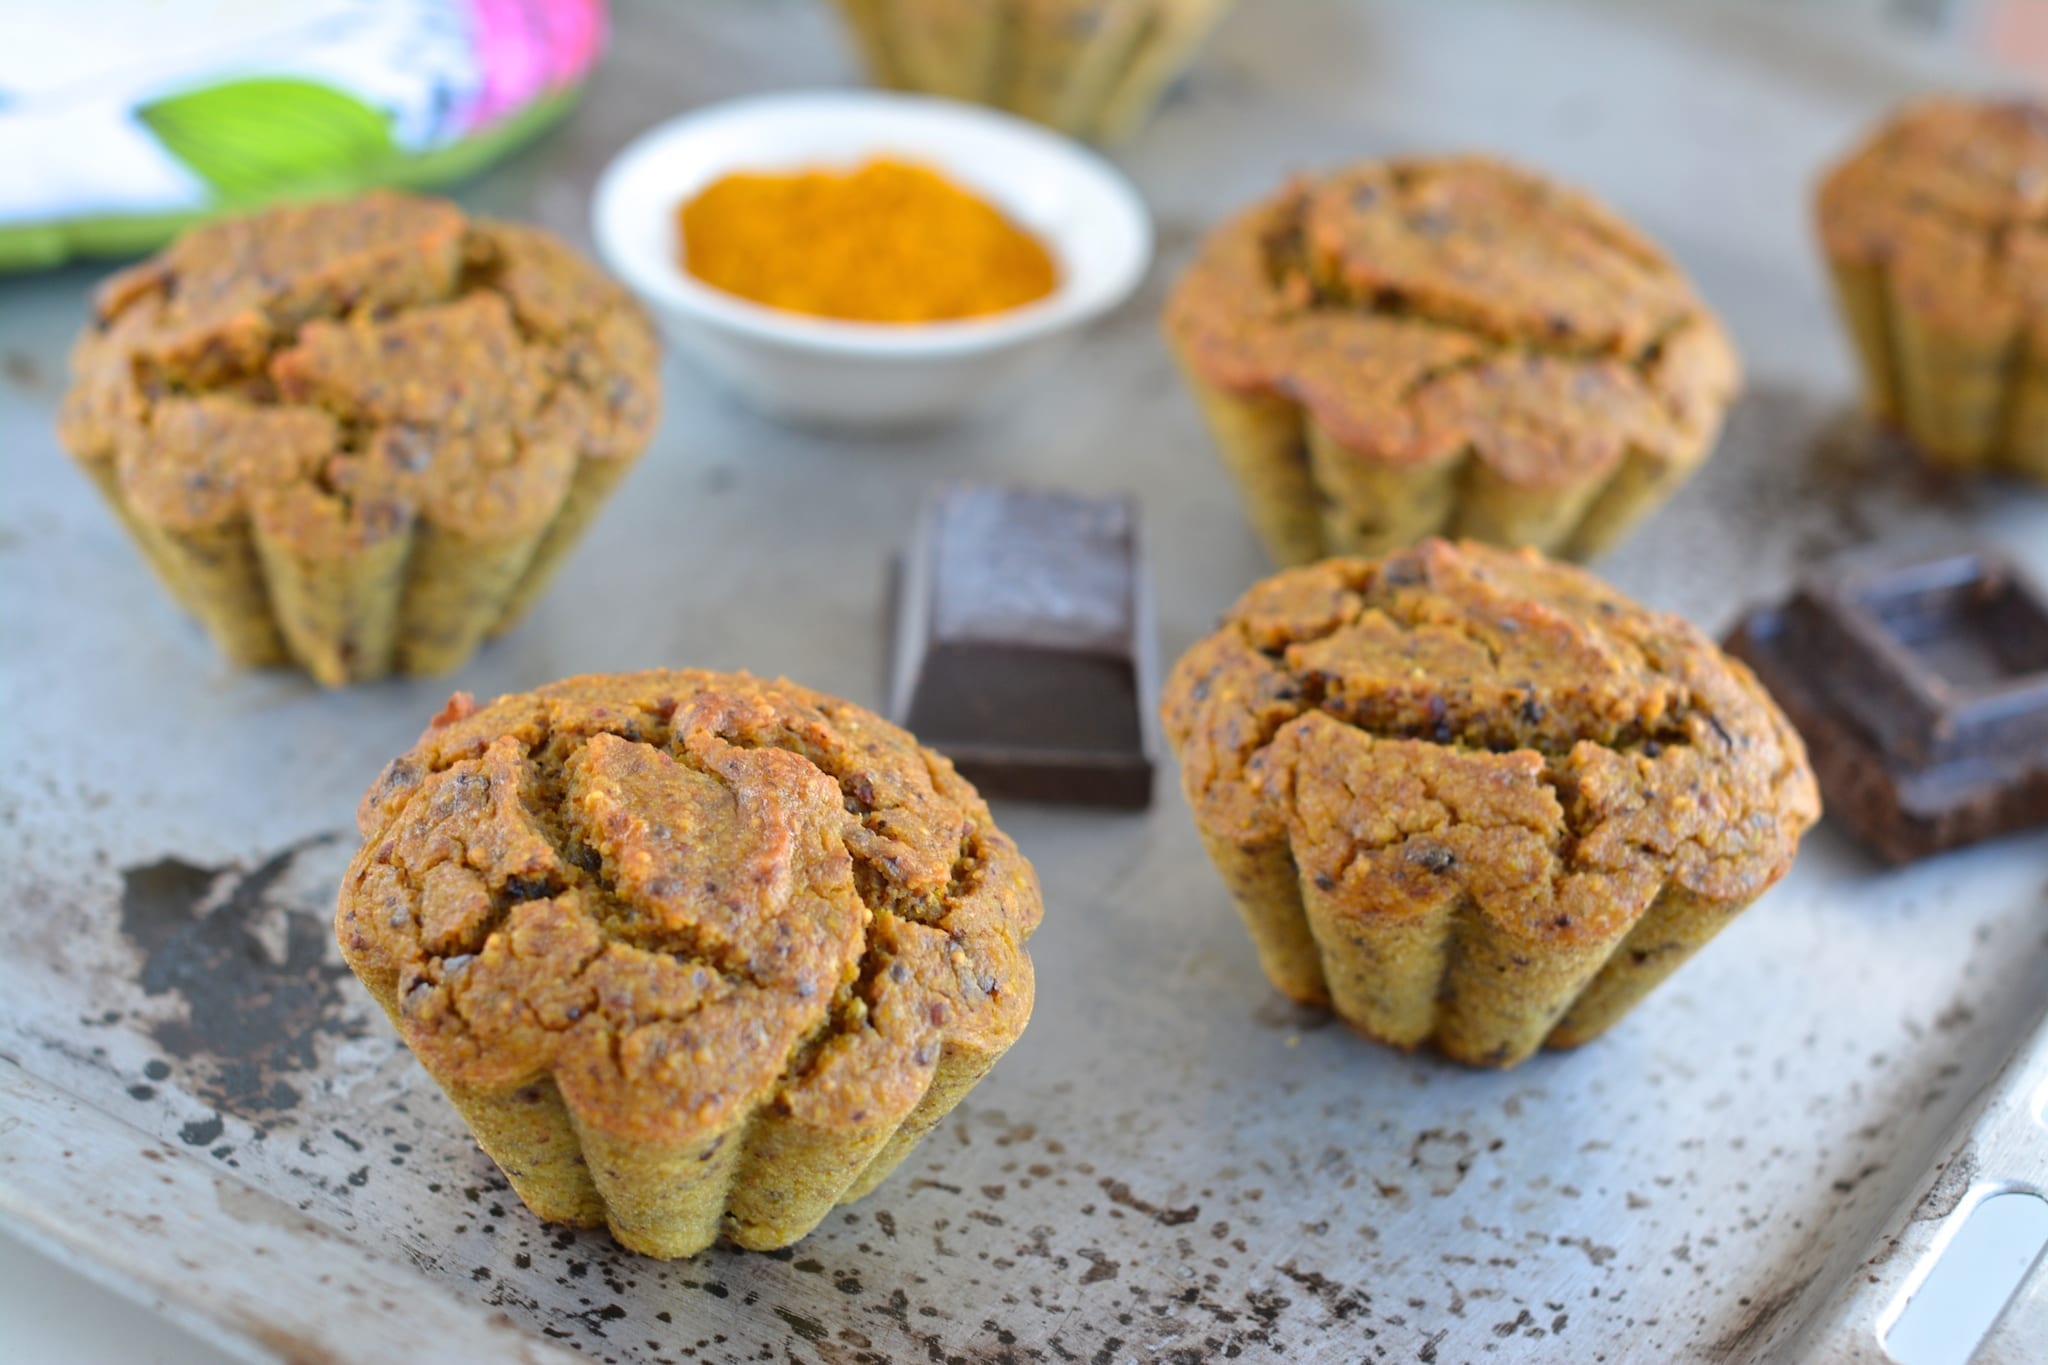 Turmeric-Chocolate Muffins with soaked millet and buckwheat